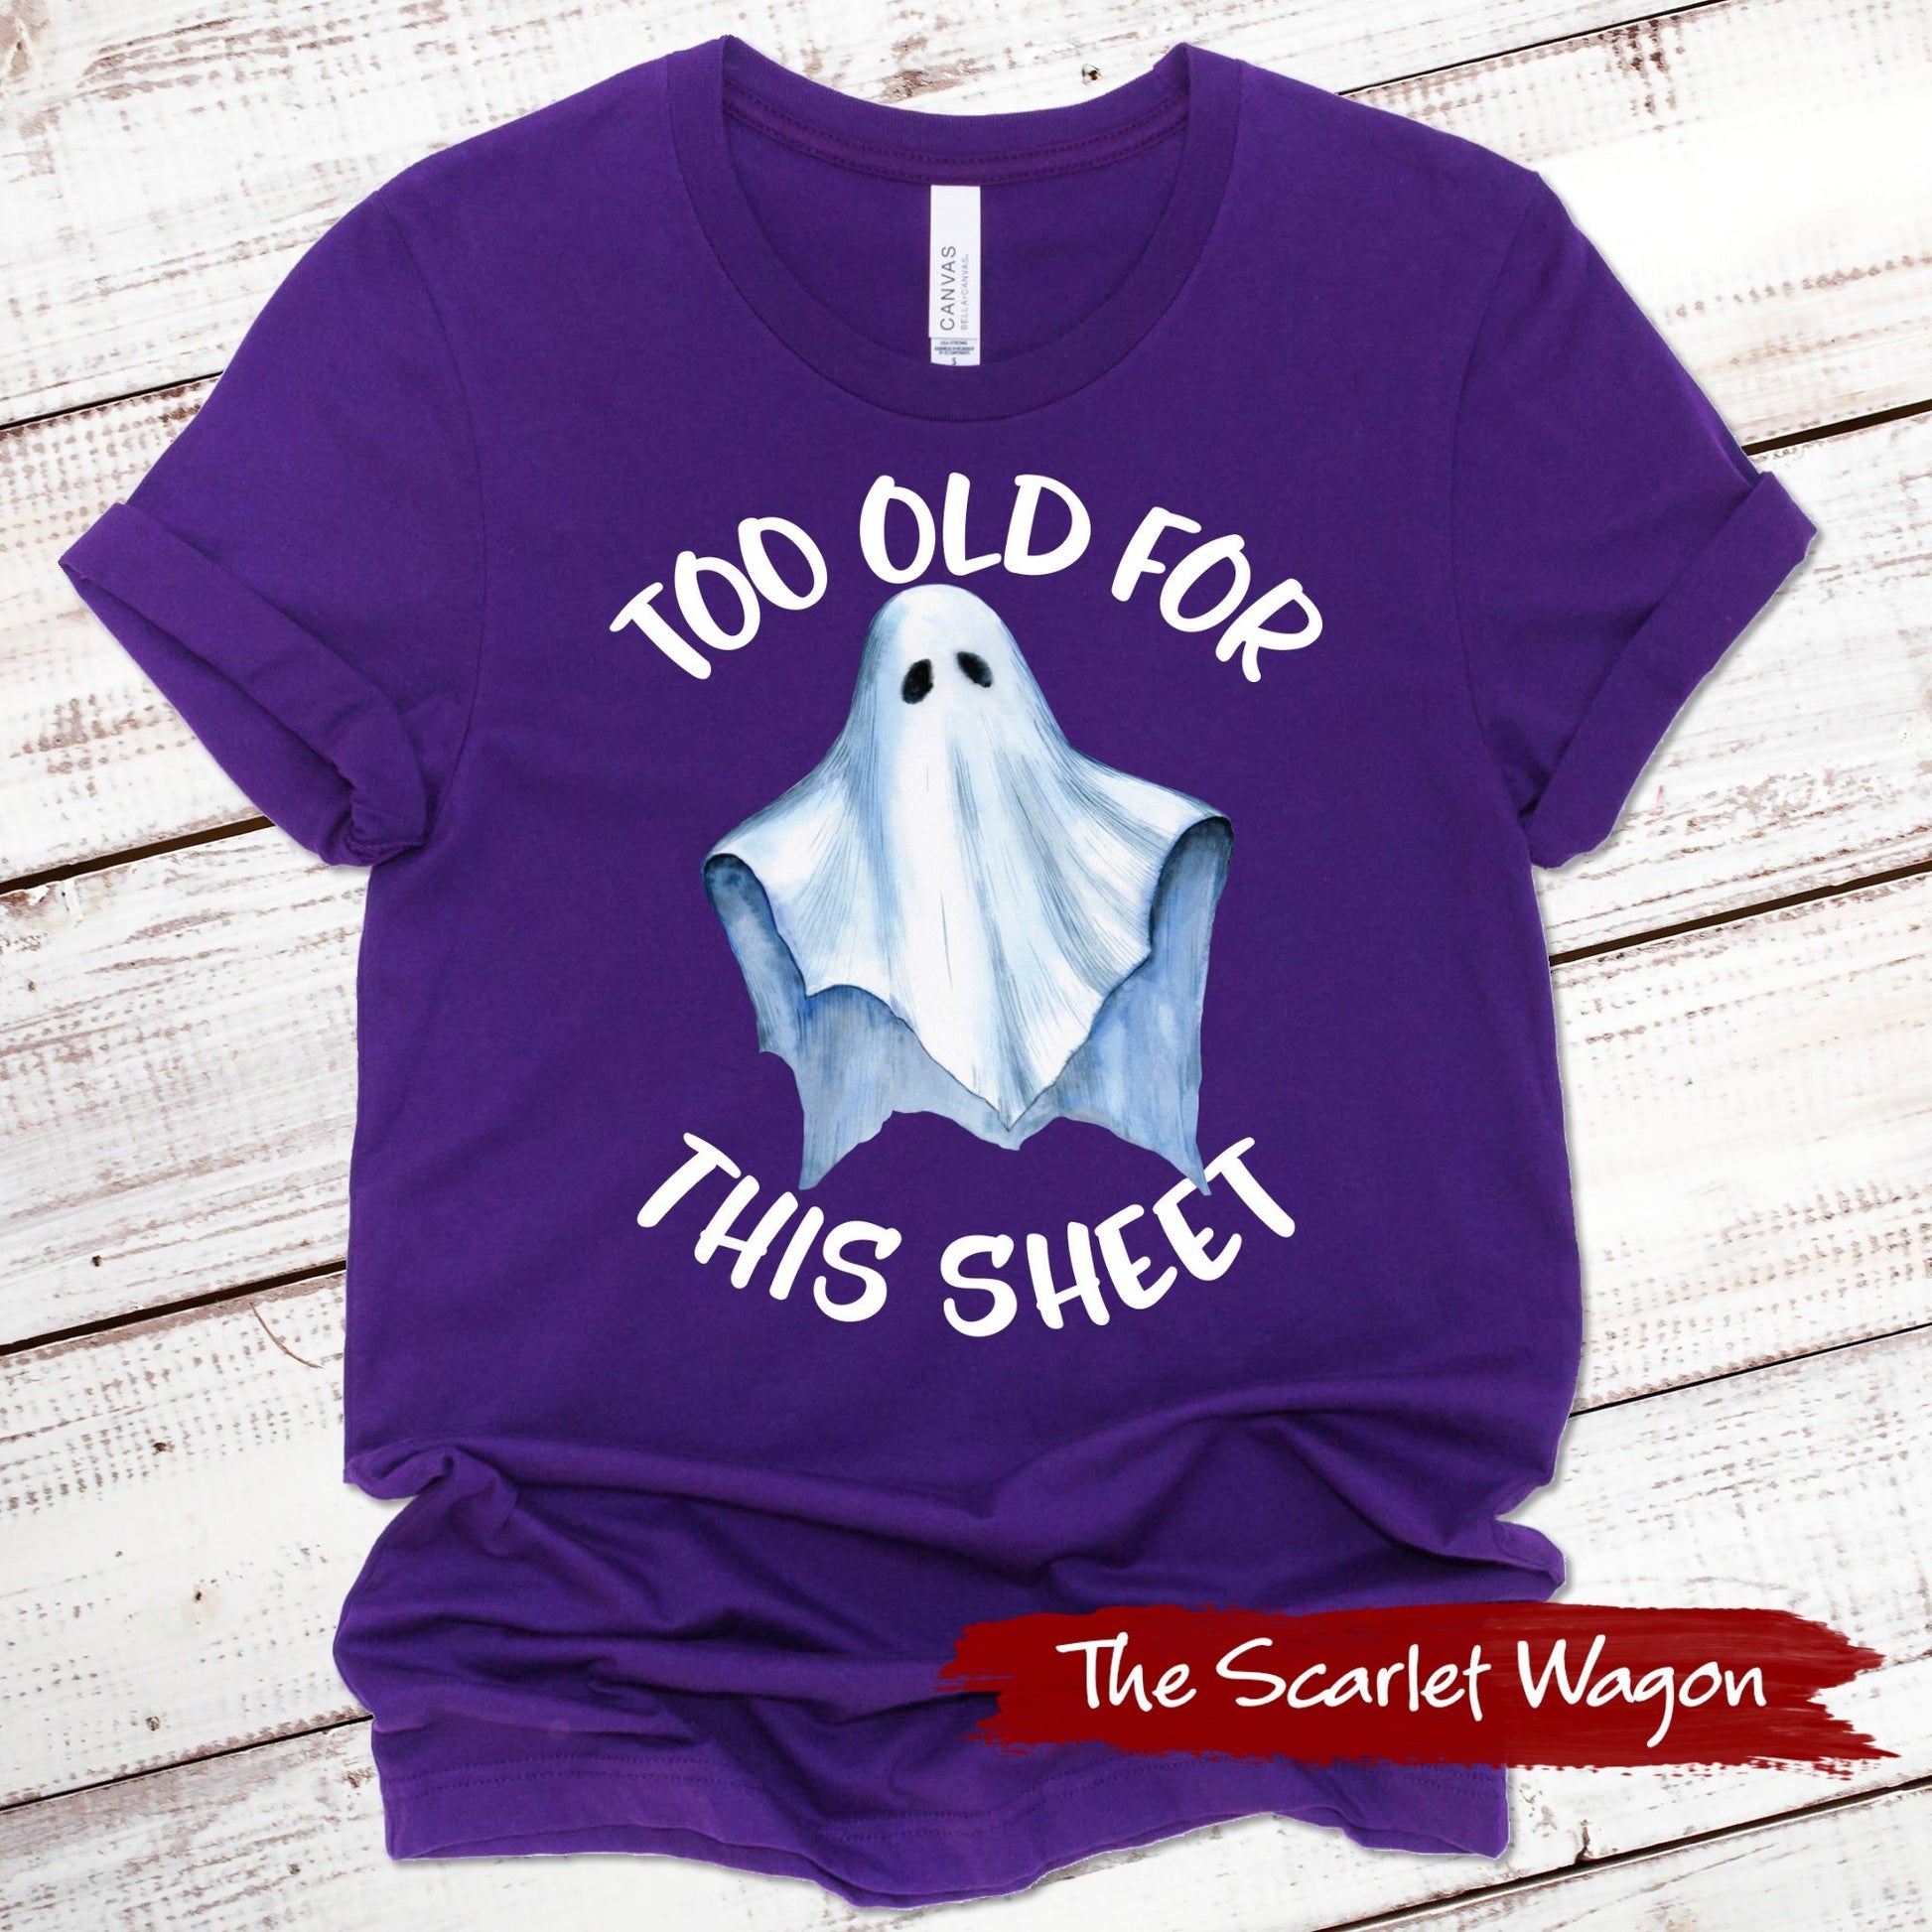 Too Old for This Sheet Halloween Shirt Scarlet Wagon Purple XS 